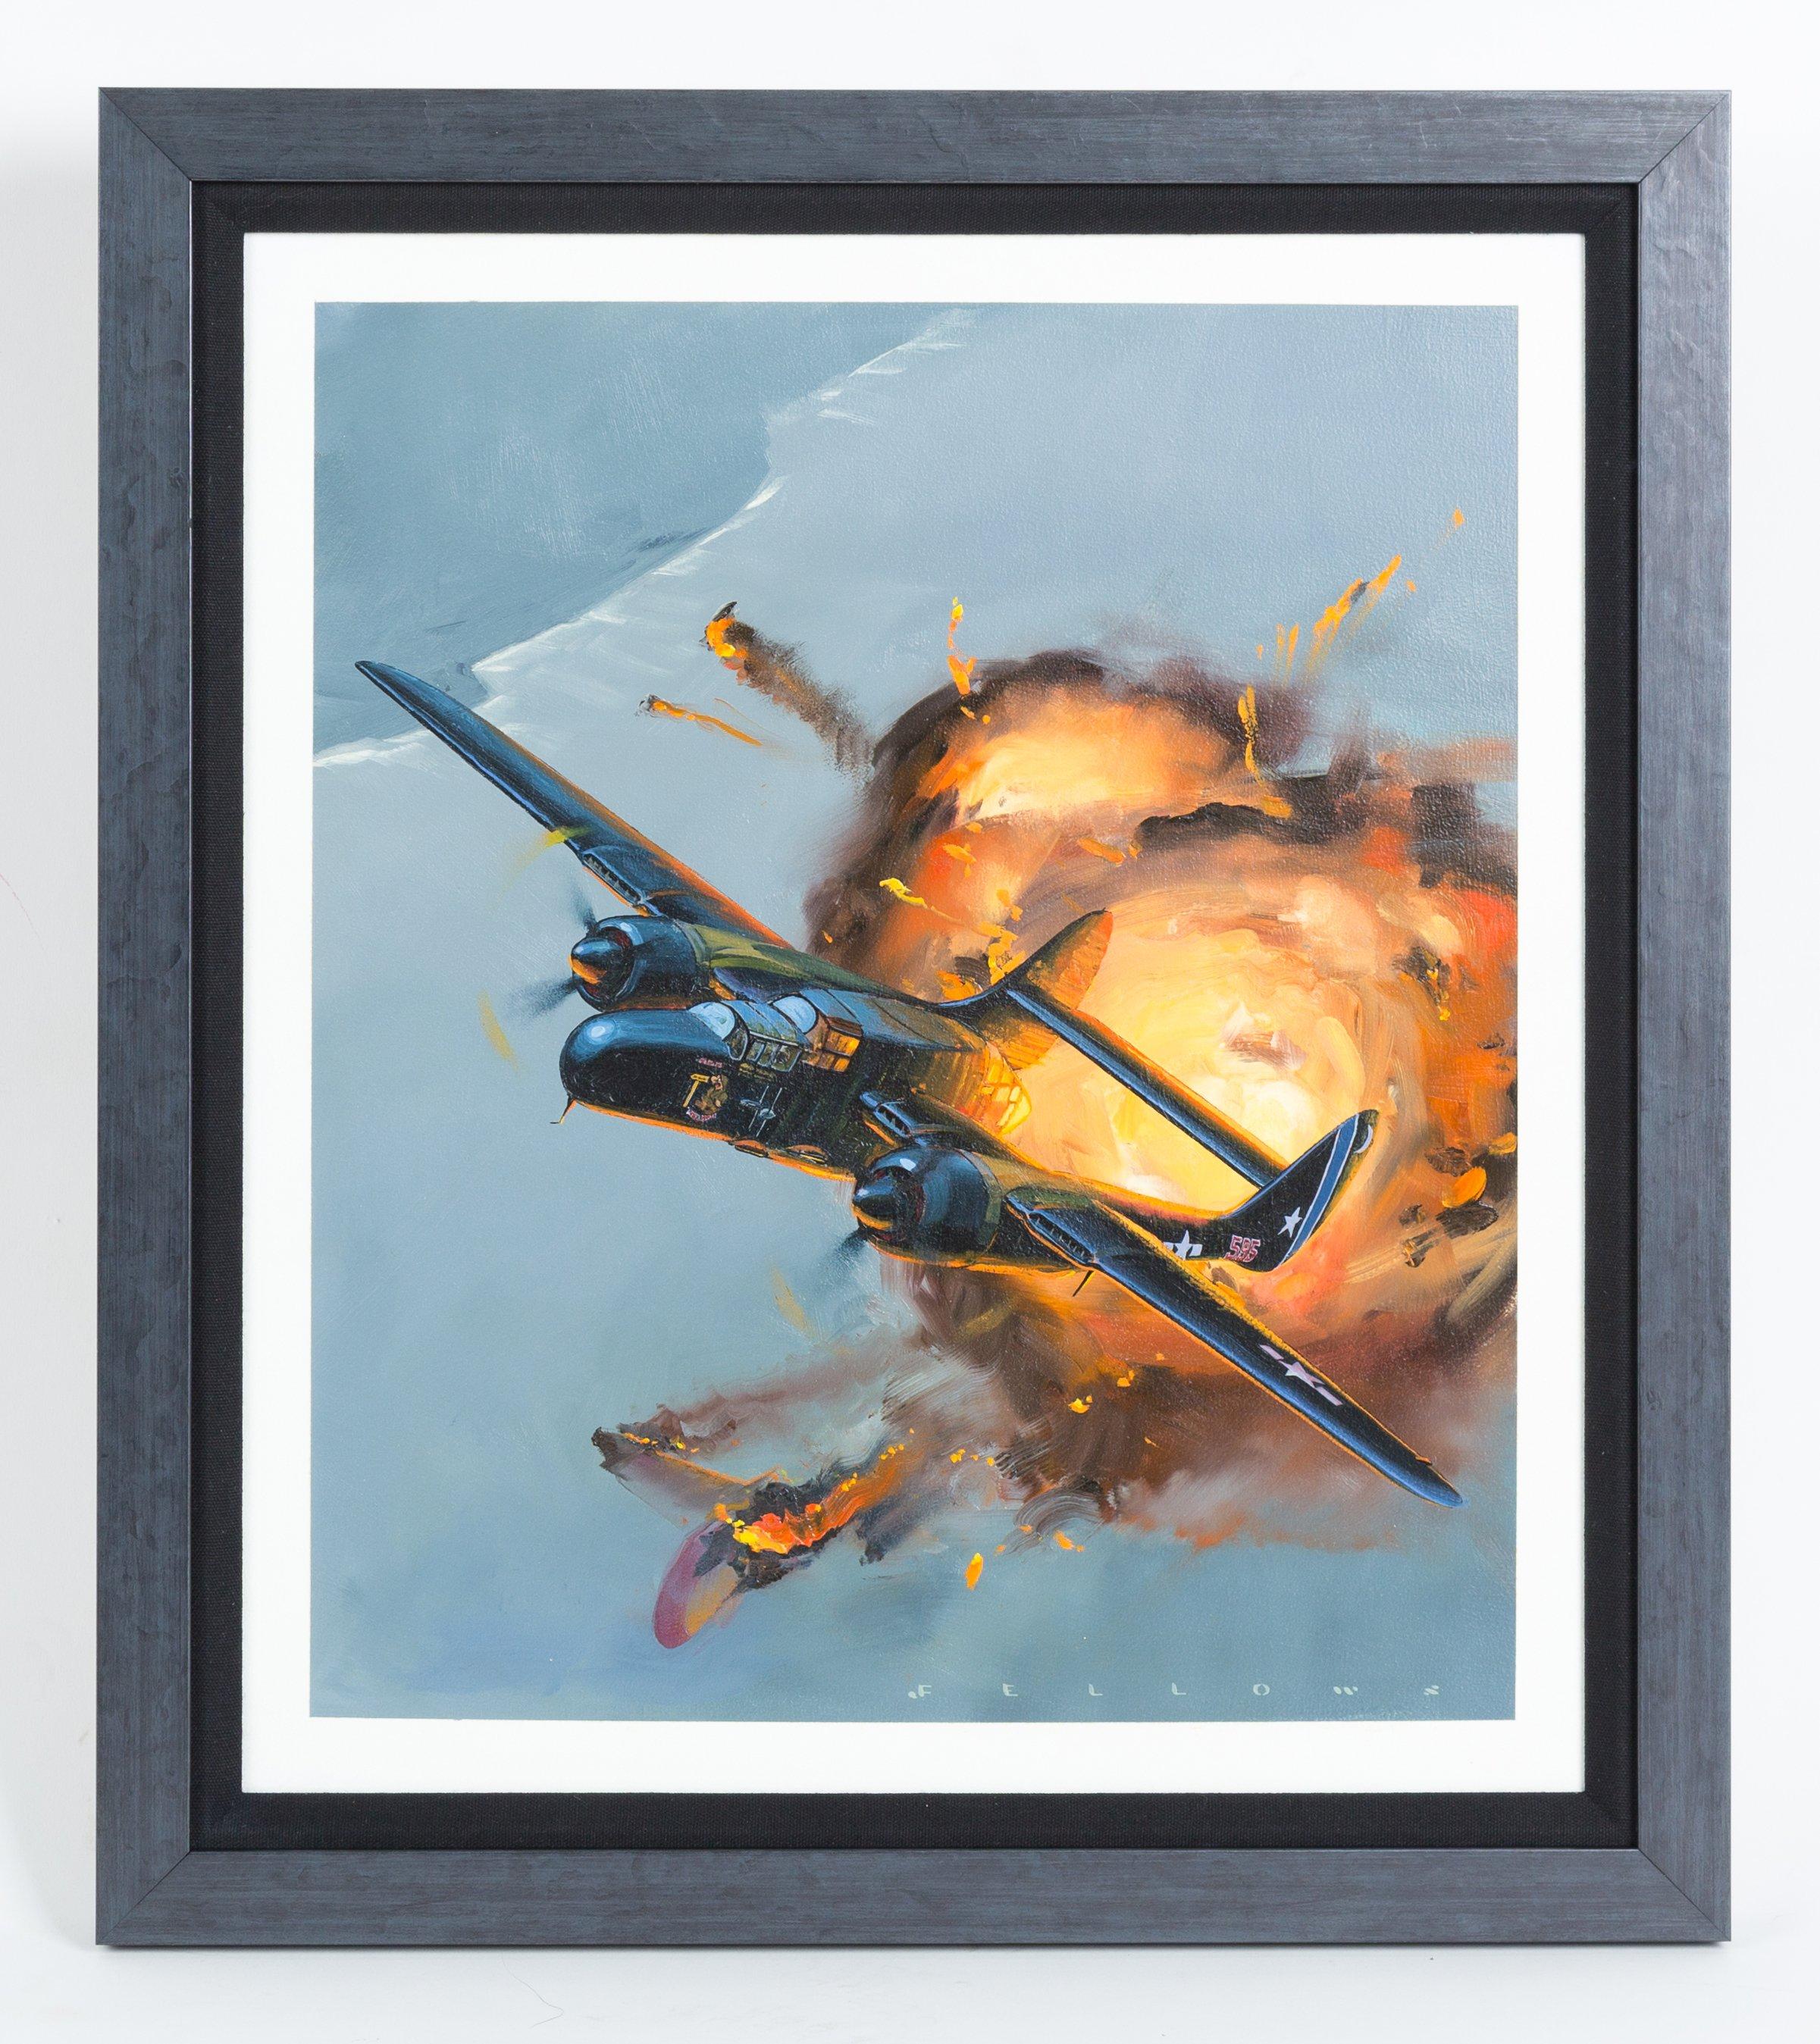 Presented is an original oil painting on Masonite (panel) titled Northrop P61-B Black Widows. The artist, Jack Fellows, signed the painting along the bottom. This painting was published on the Republic of the Marshall Islands 33 cent stamp issued on